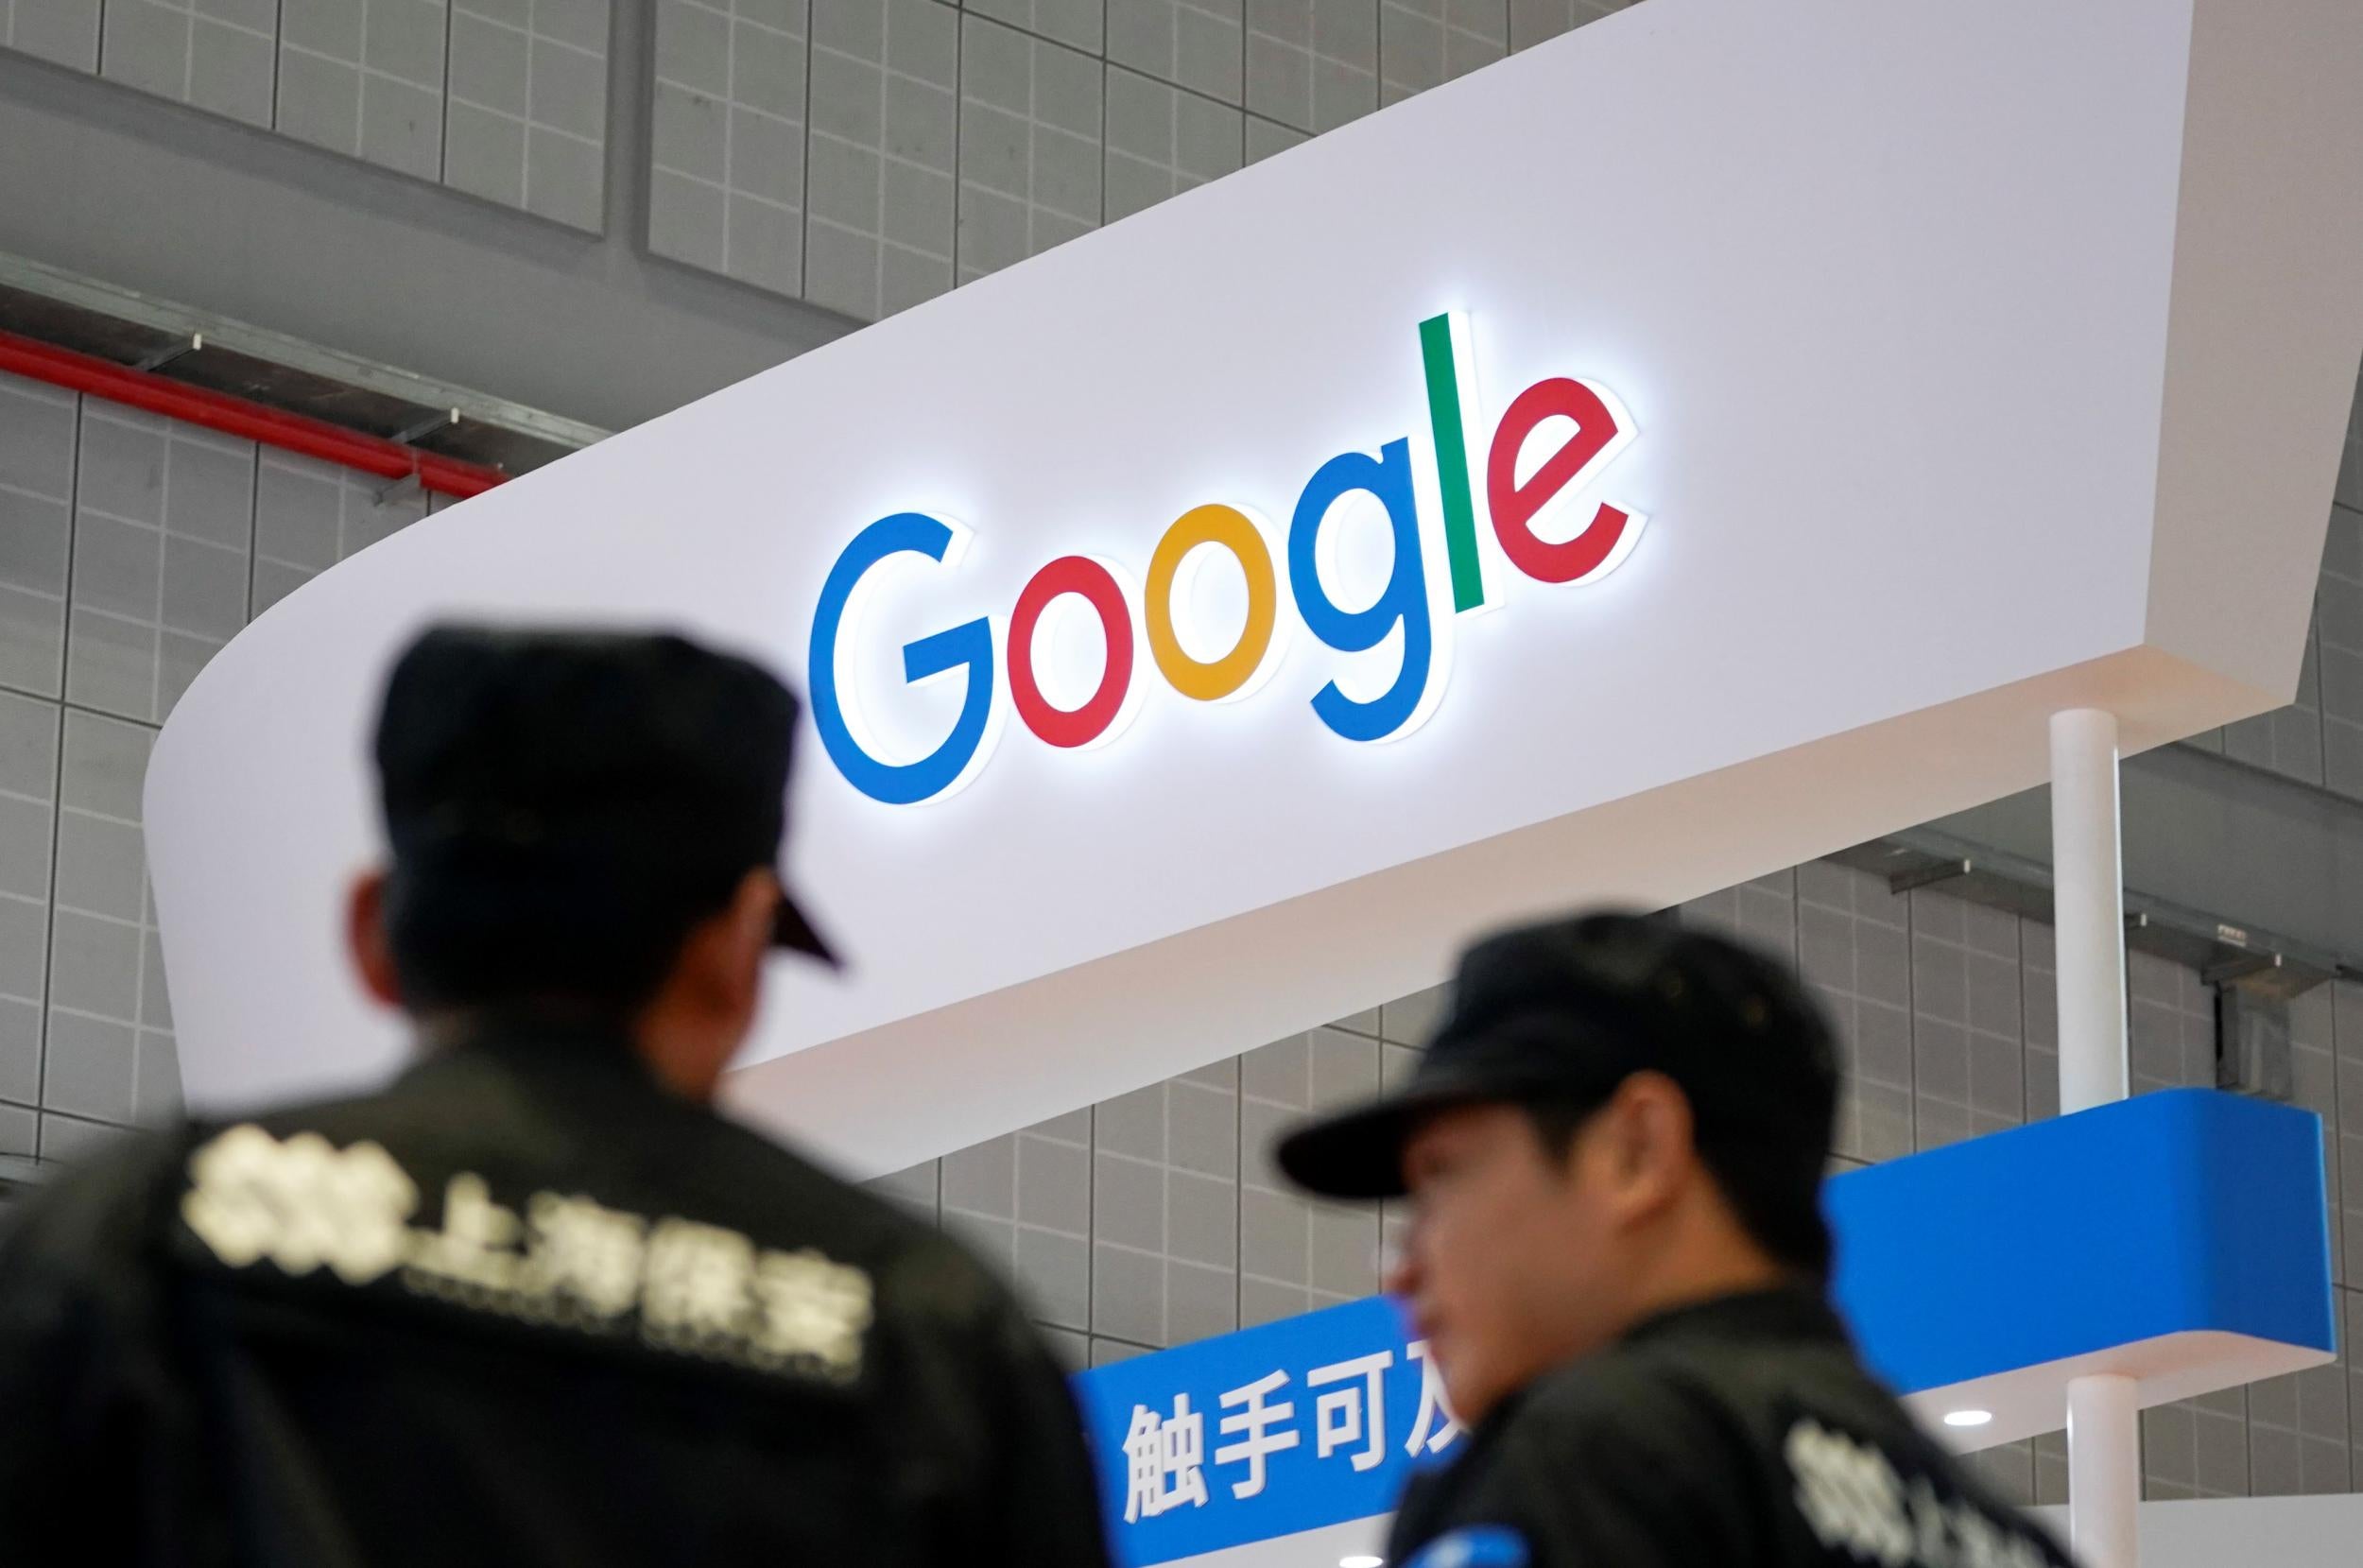 A Google sign is seen at a conference in Shanghai, 5 November, 2018